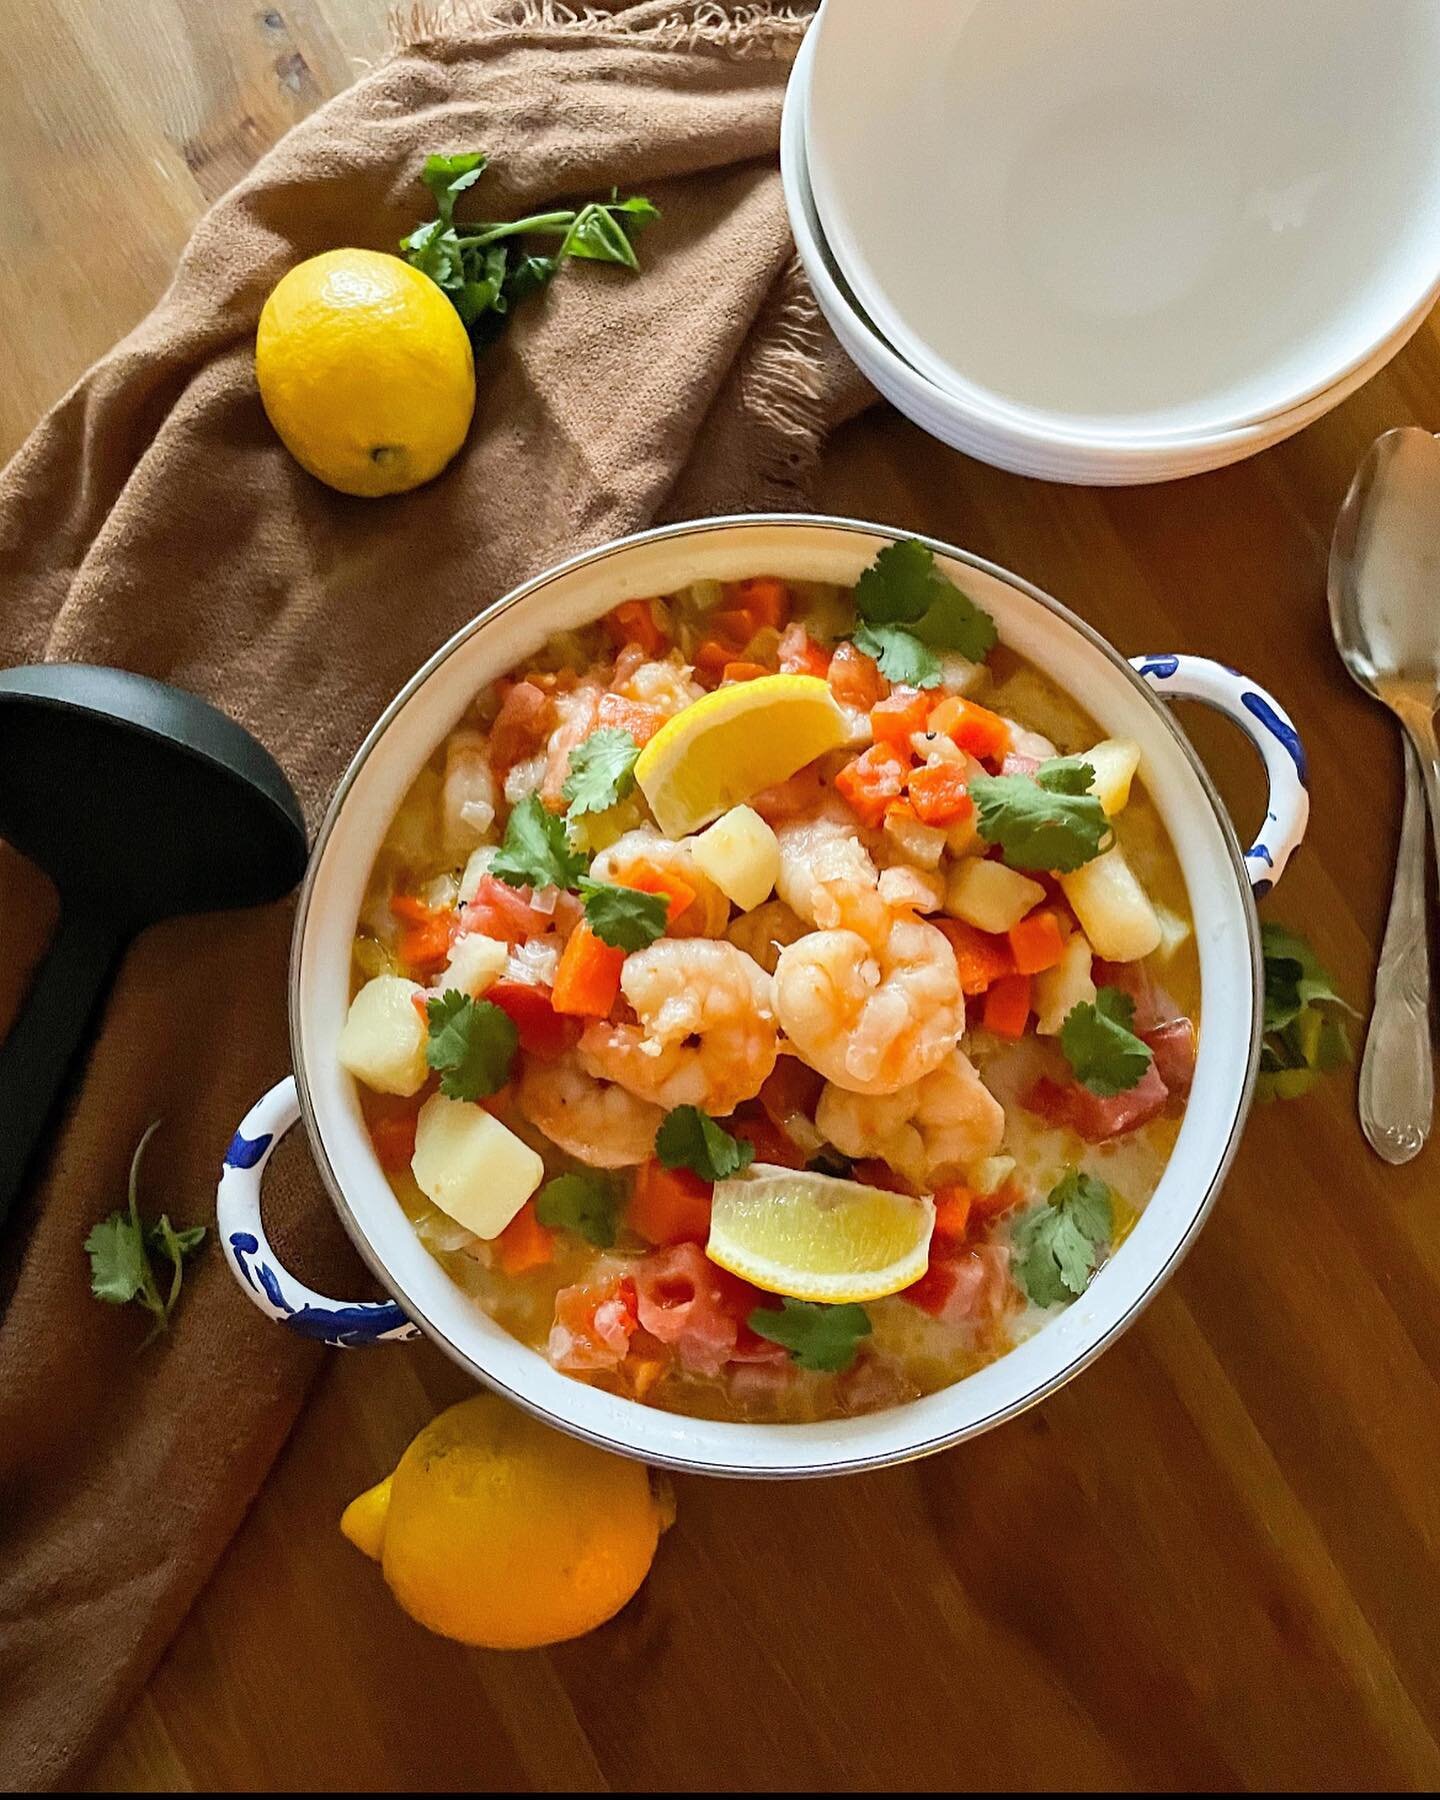 Is there anything cozier than a big ol&rsquo; bowl of homemade soup?! 🍲

This shrimp soup is full of flavour &amp; so comforting you won&rsquo;t regret making it! 
Recipe below👇🏻

&bull;3 tbsp butter
&bull;4oz red bell pepper, diced
&bull;6oz onio